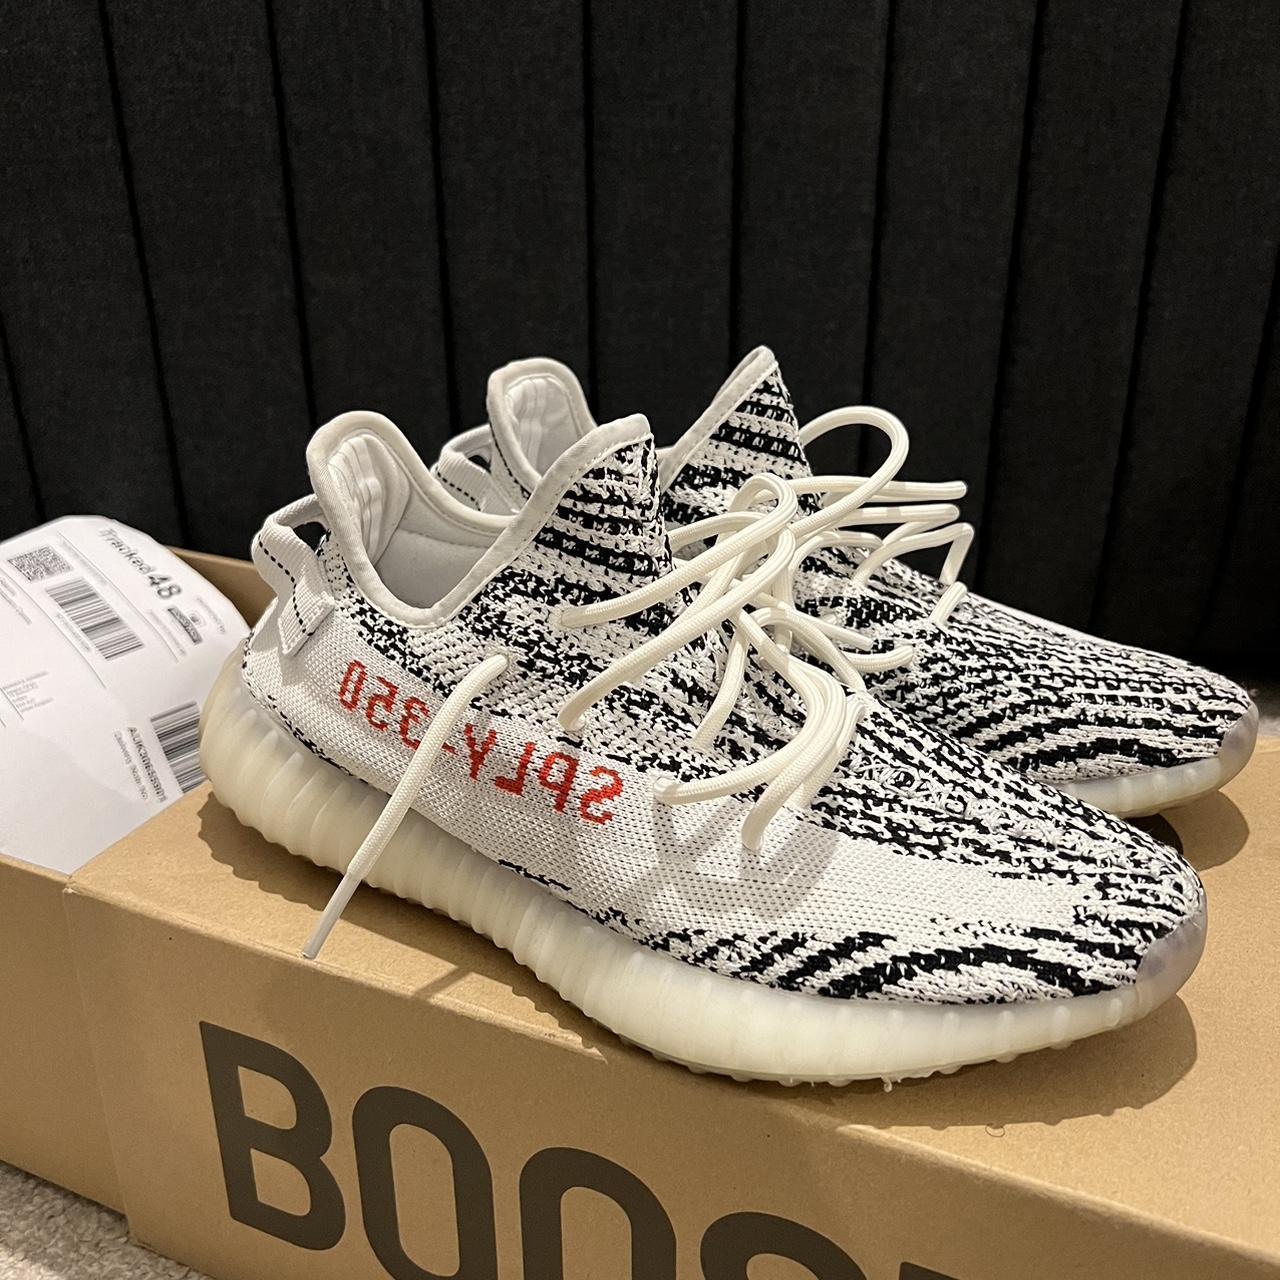 Adidas Yeezy Boost 350 V2 Immaculate condition - Depop